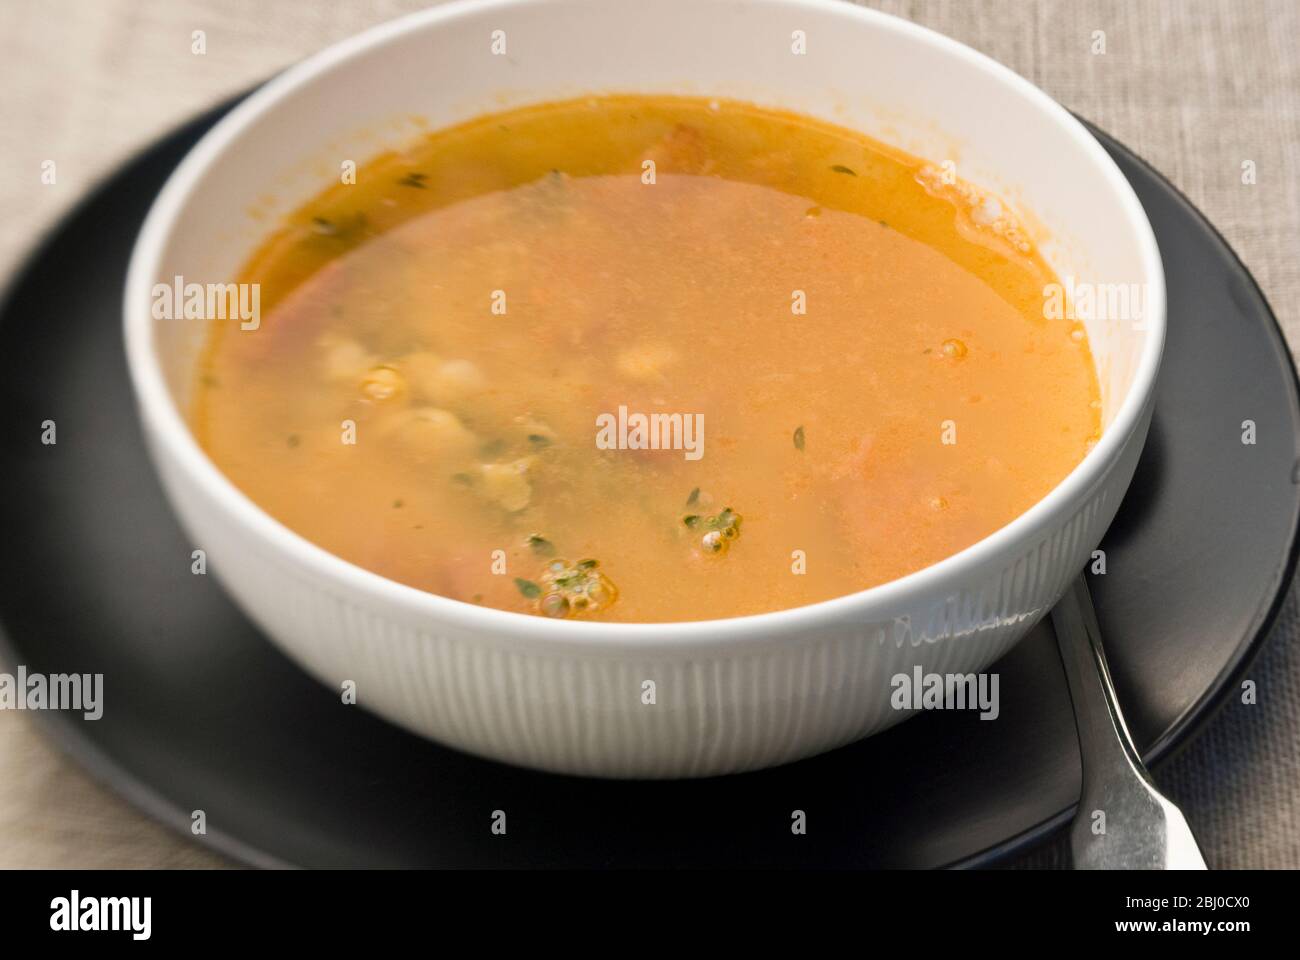 Bowl of warming soup made of yellow split peas, good stock, pieces of chorizo sausage, and thyme sprigs - Stock Photo